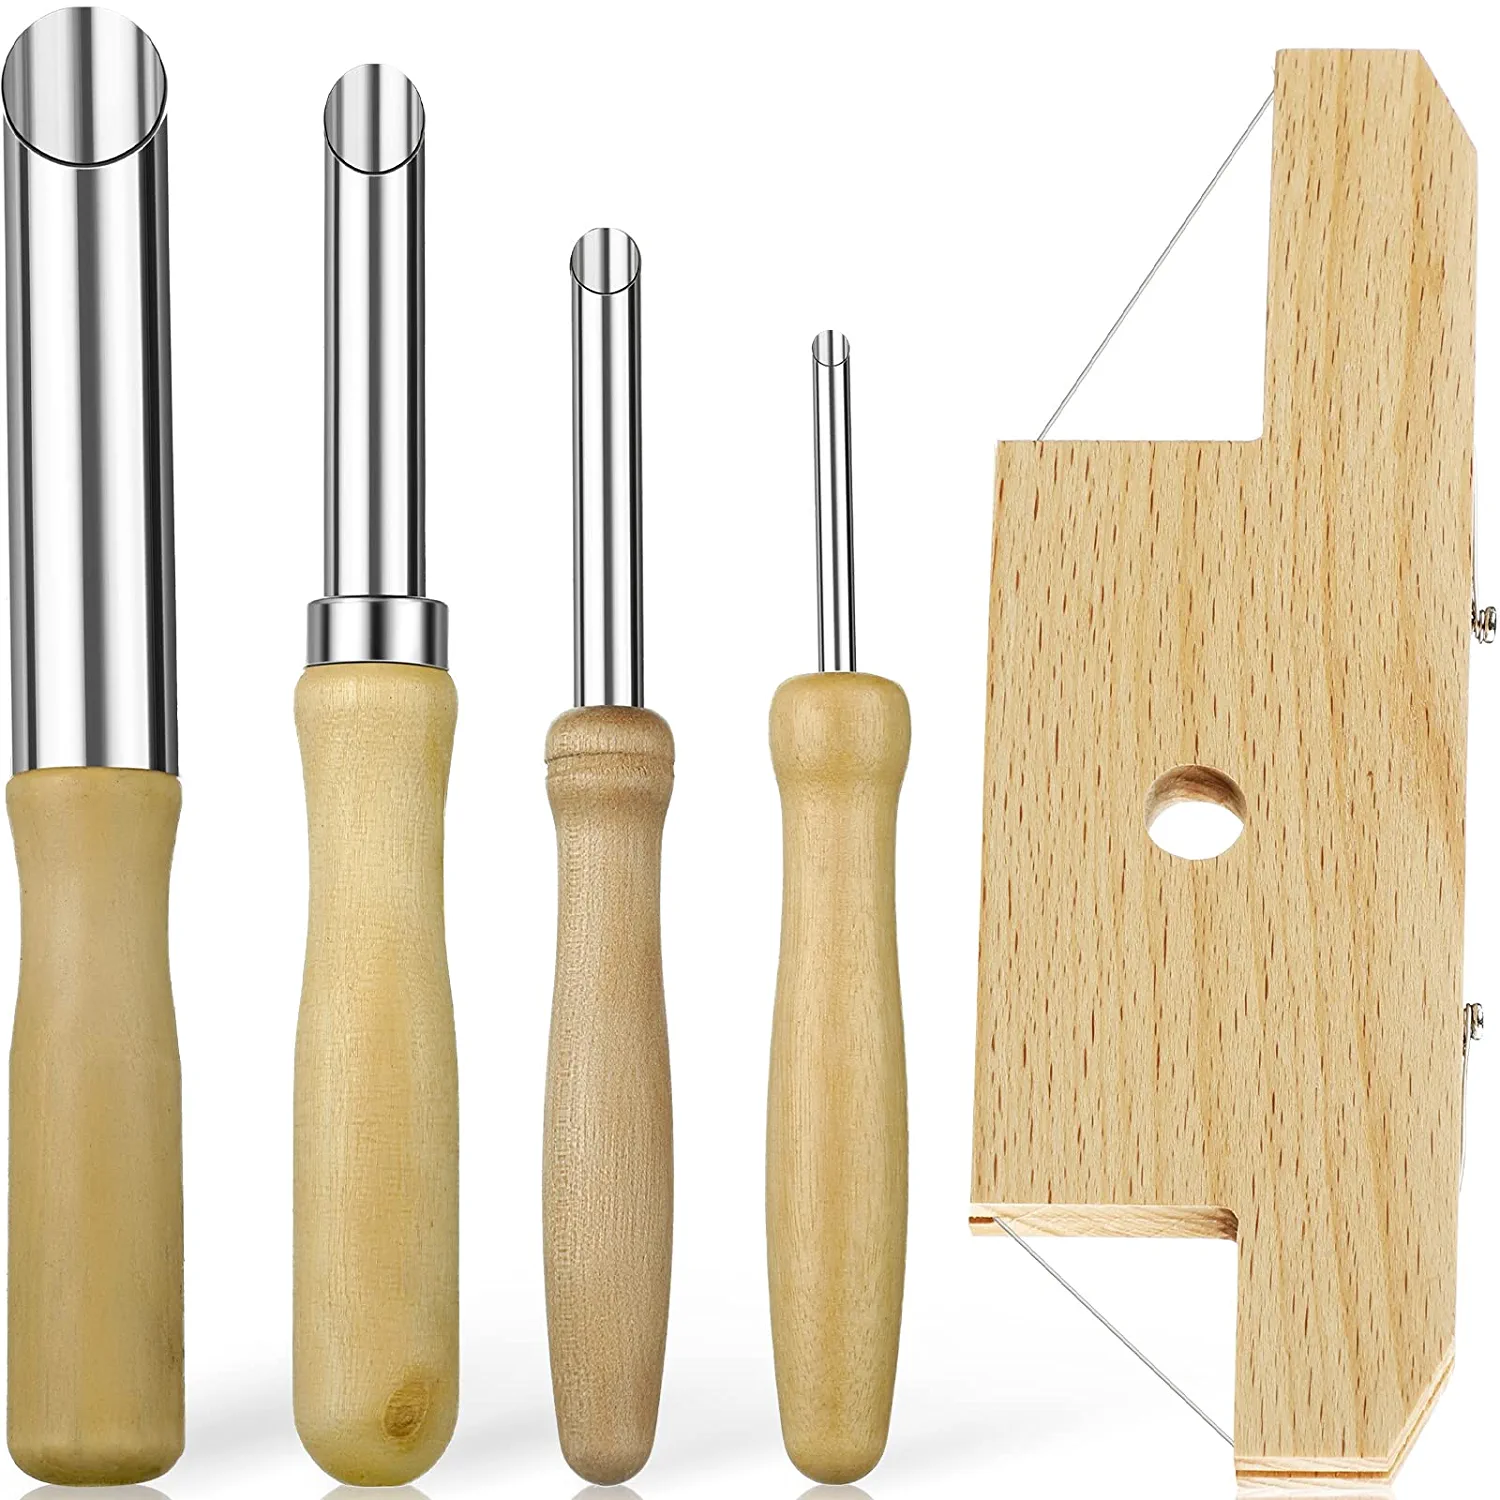 5 Pcs Pottery Clay Tools Set Includes Wood And Wire Bevel Cutter And 4 Pcs Circu - £15.79 GBP